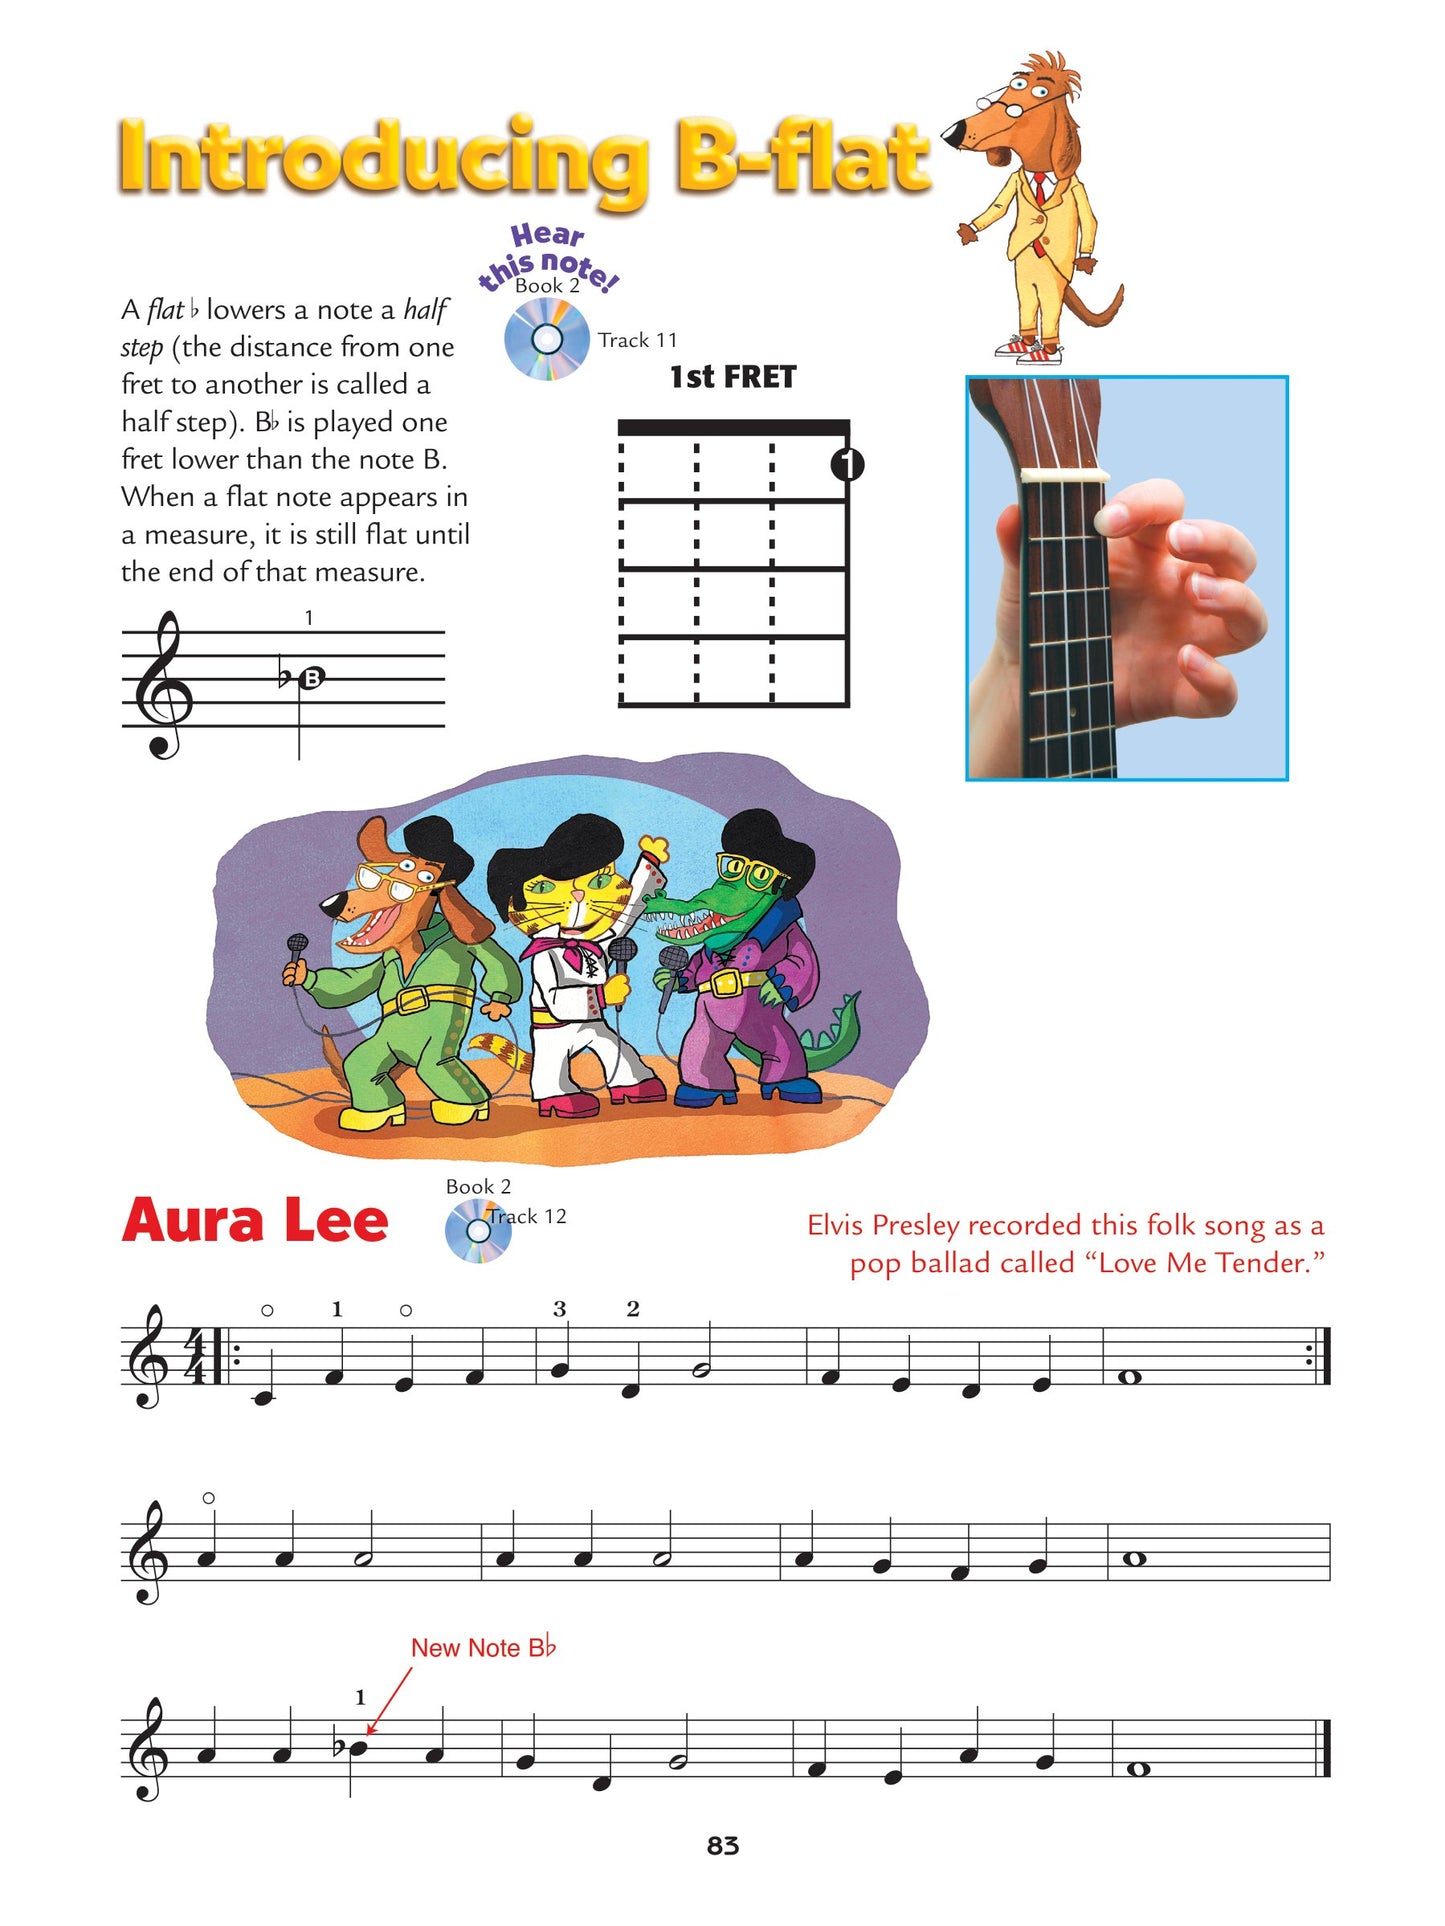 Alfred's Kid's Ukulele Course Complete Book/Ola